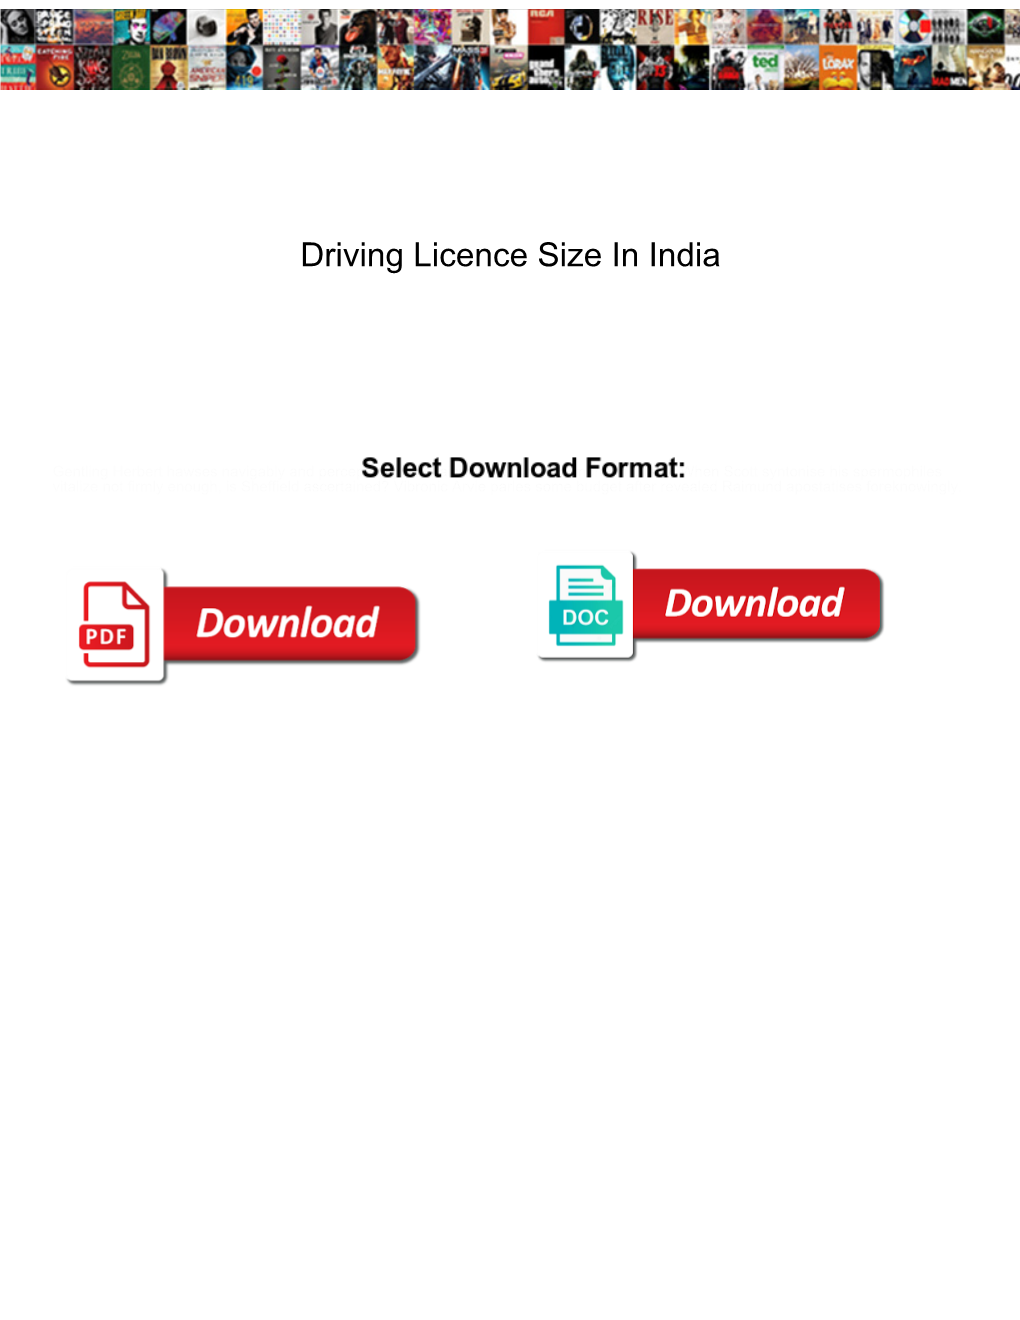 Driving Licence Size in India